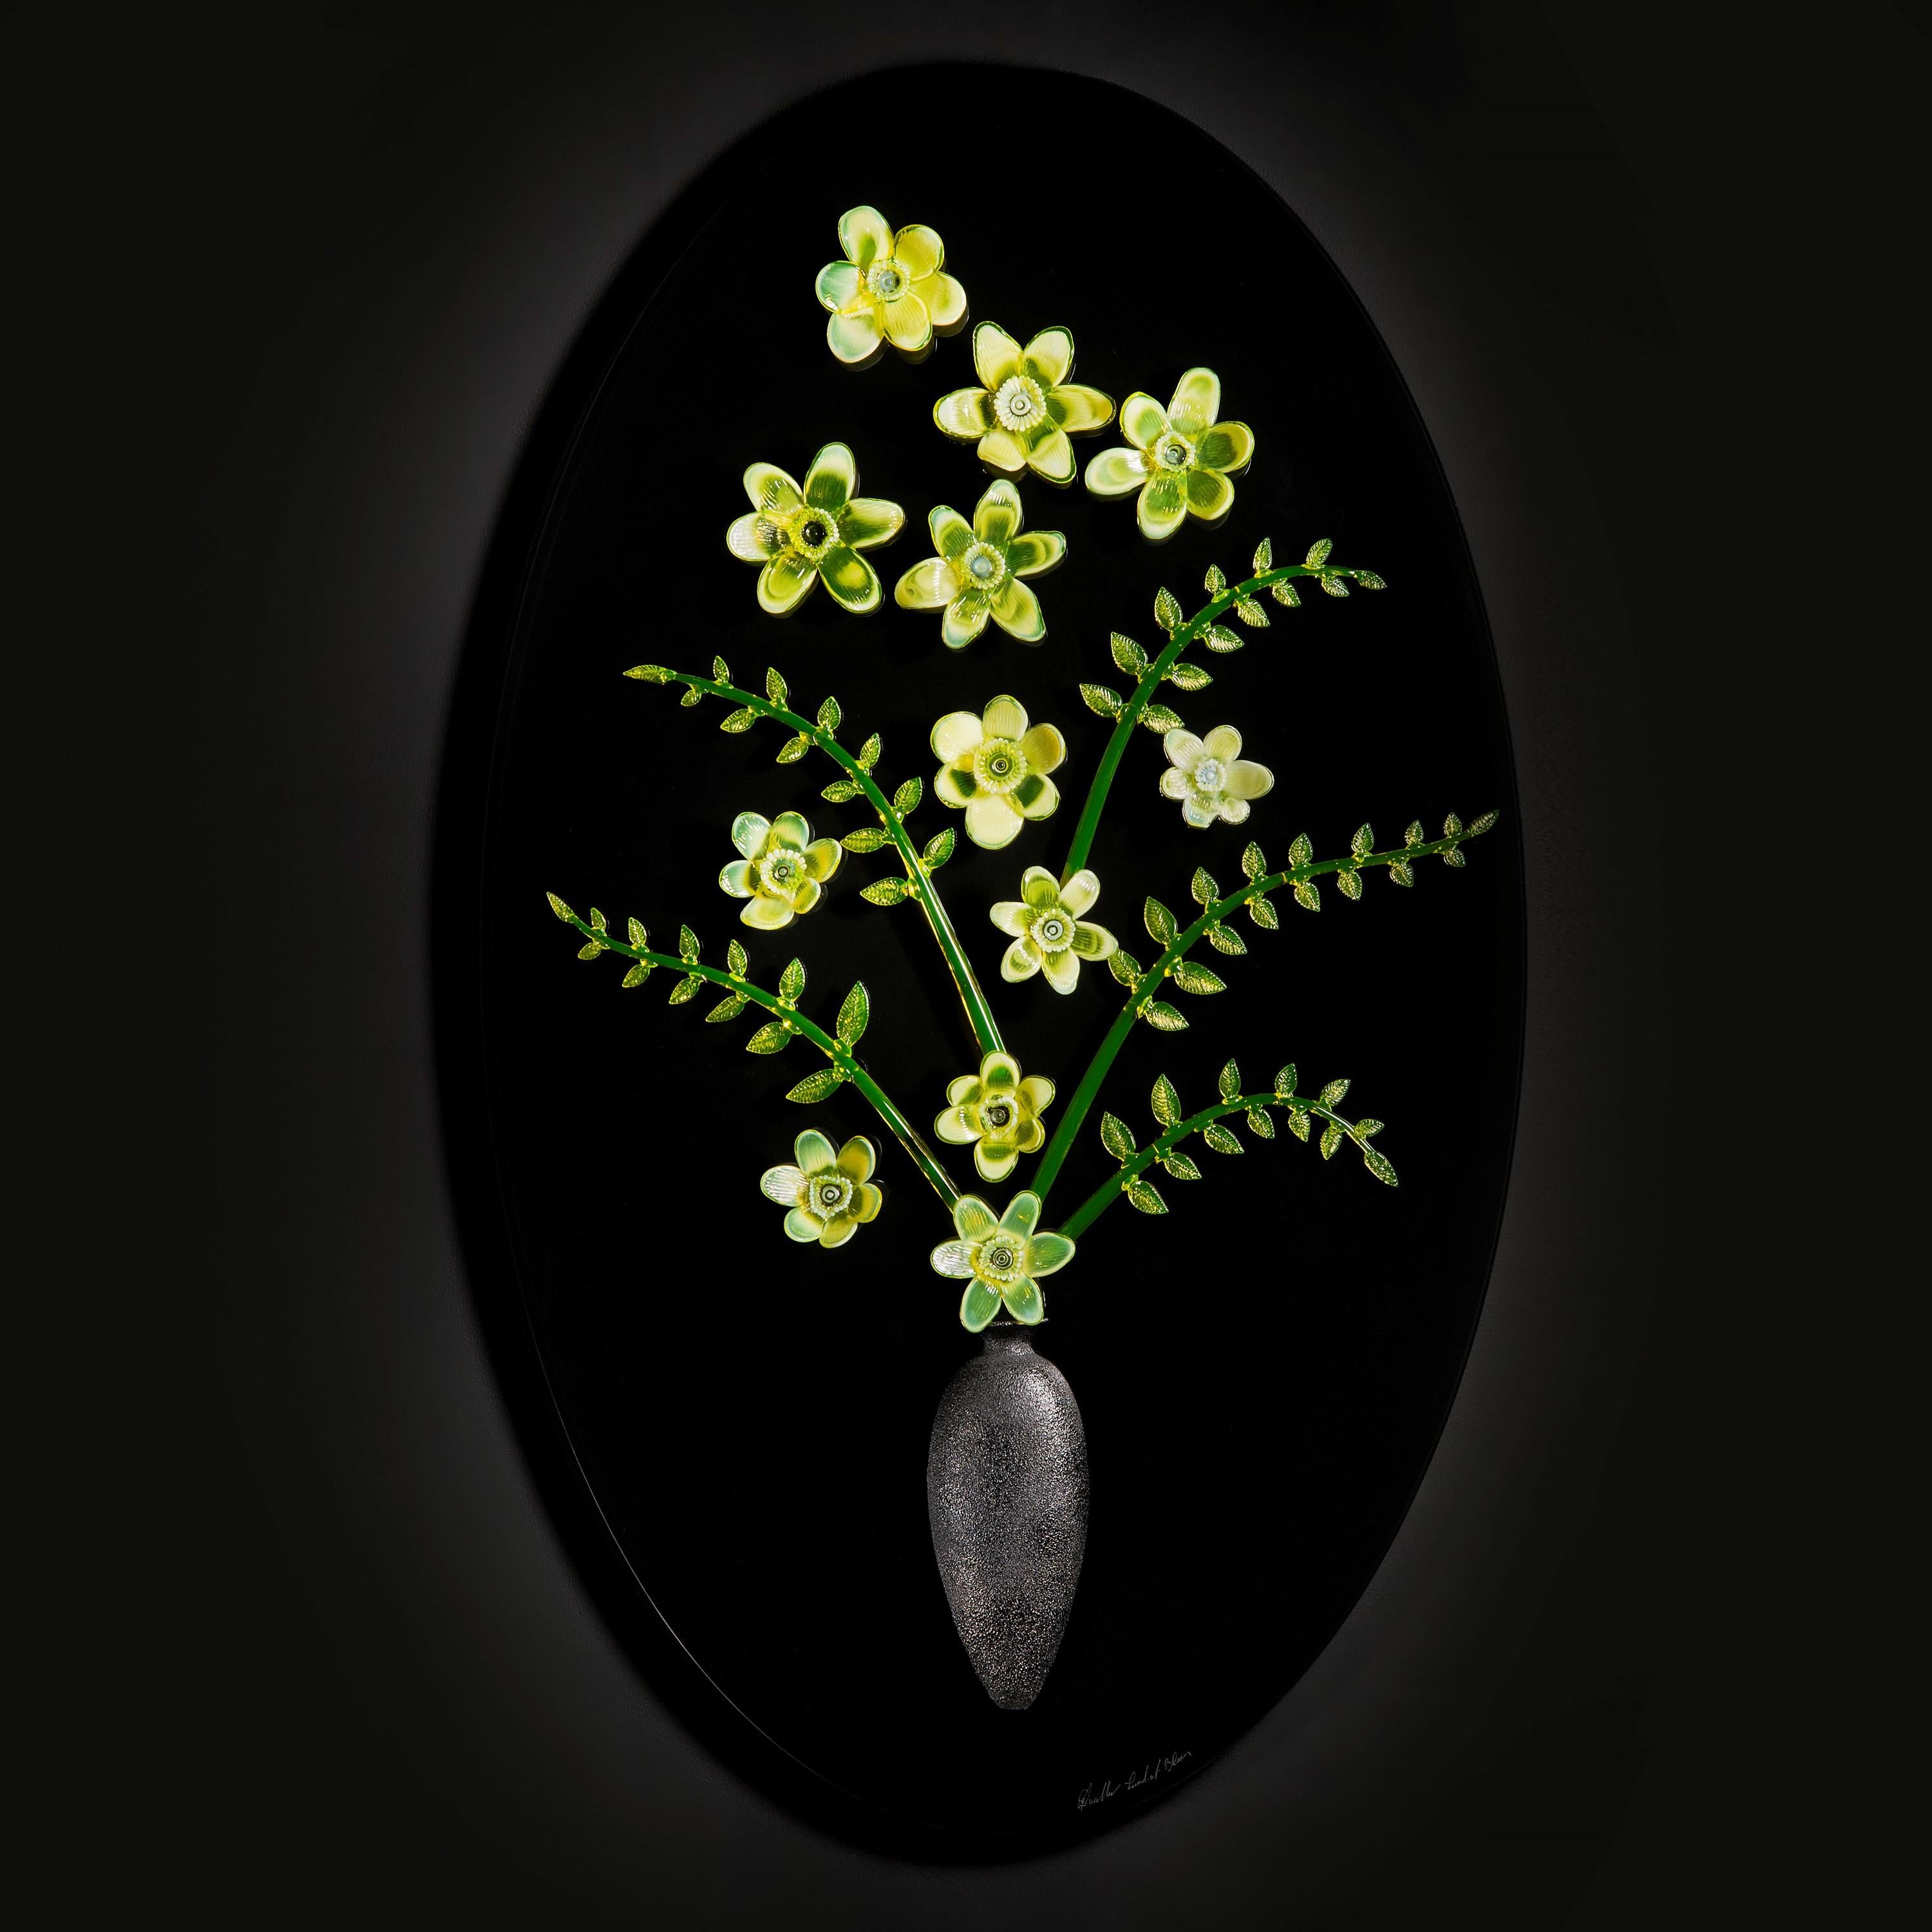 Irradiant Bloom VI is an oval sculptural wall mounted artwork by the British artist and Blown Away II series winner, Elliot Walker. The artwork features hand-sculpted uranium flowers with a bisected black vase that is bonded to the back. The various